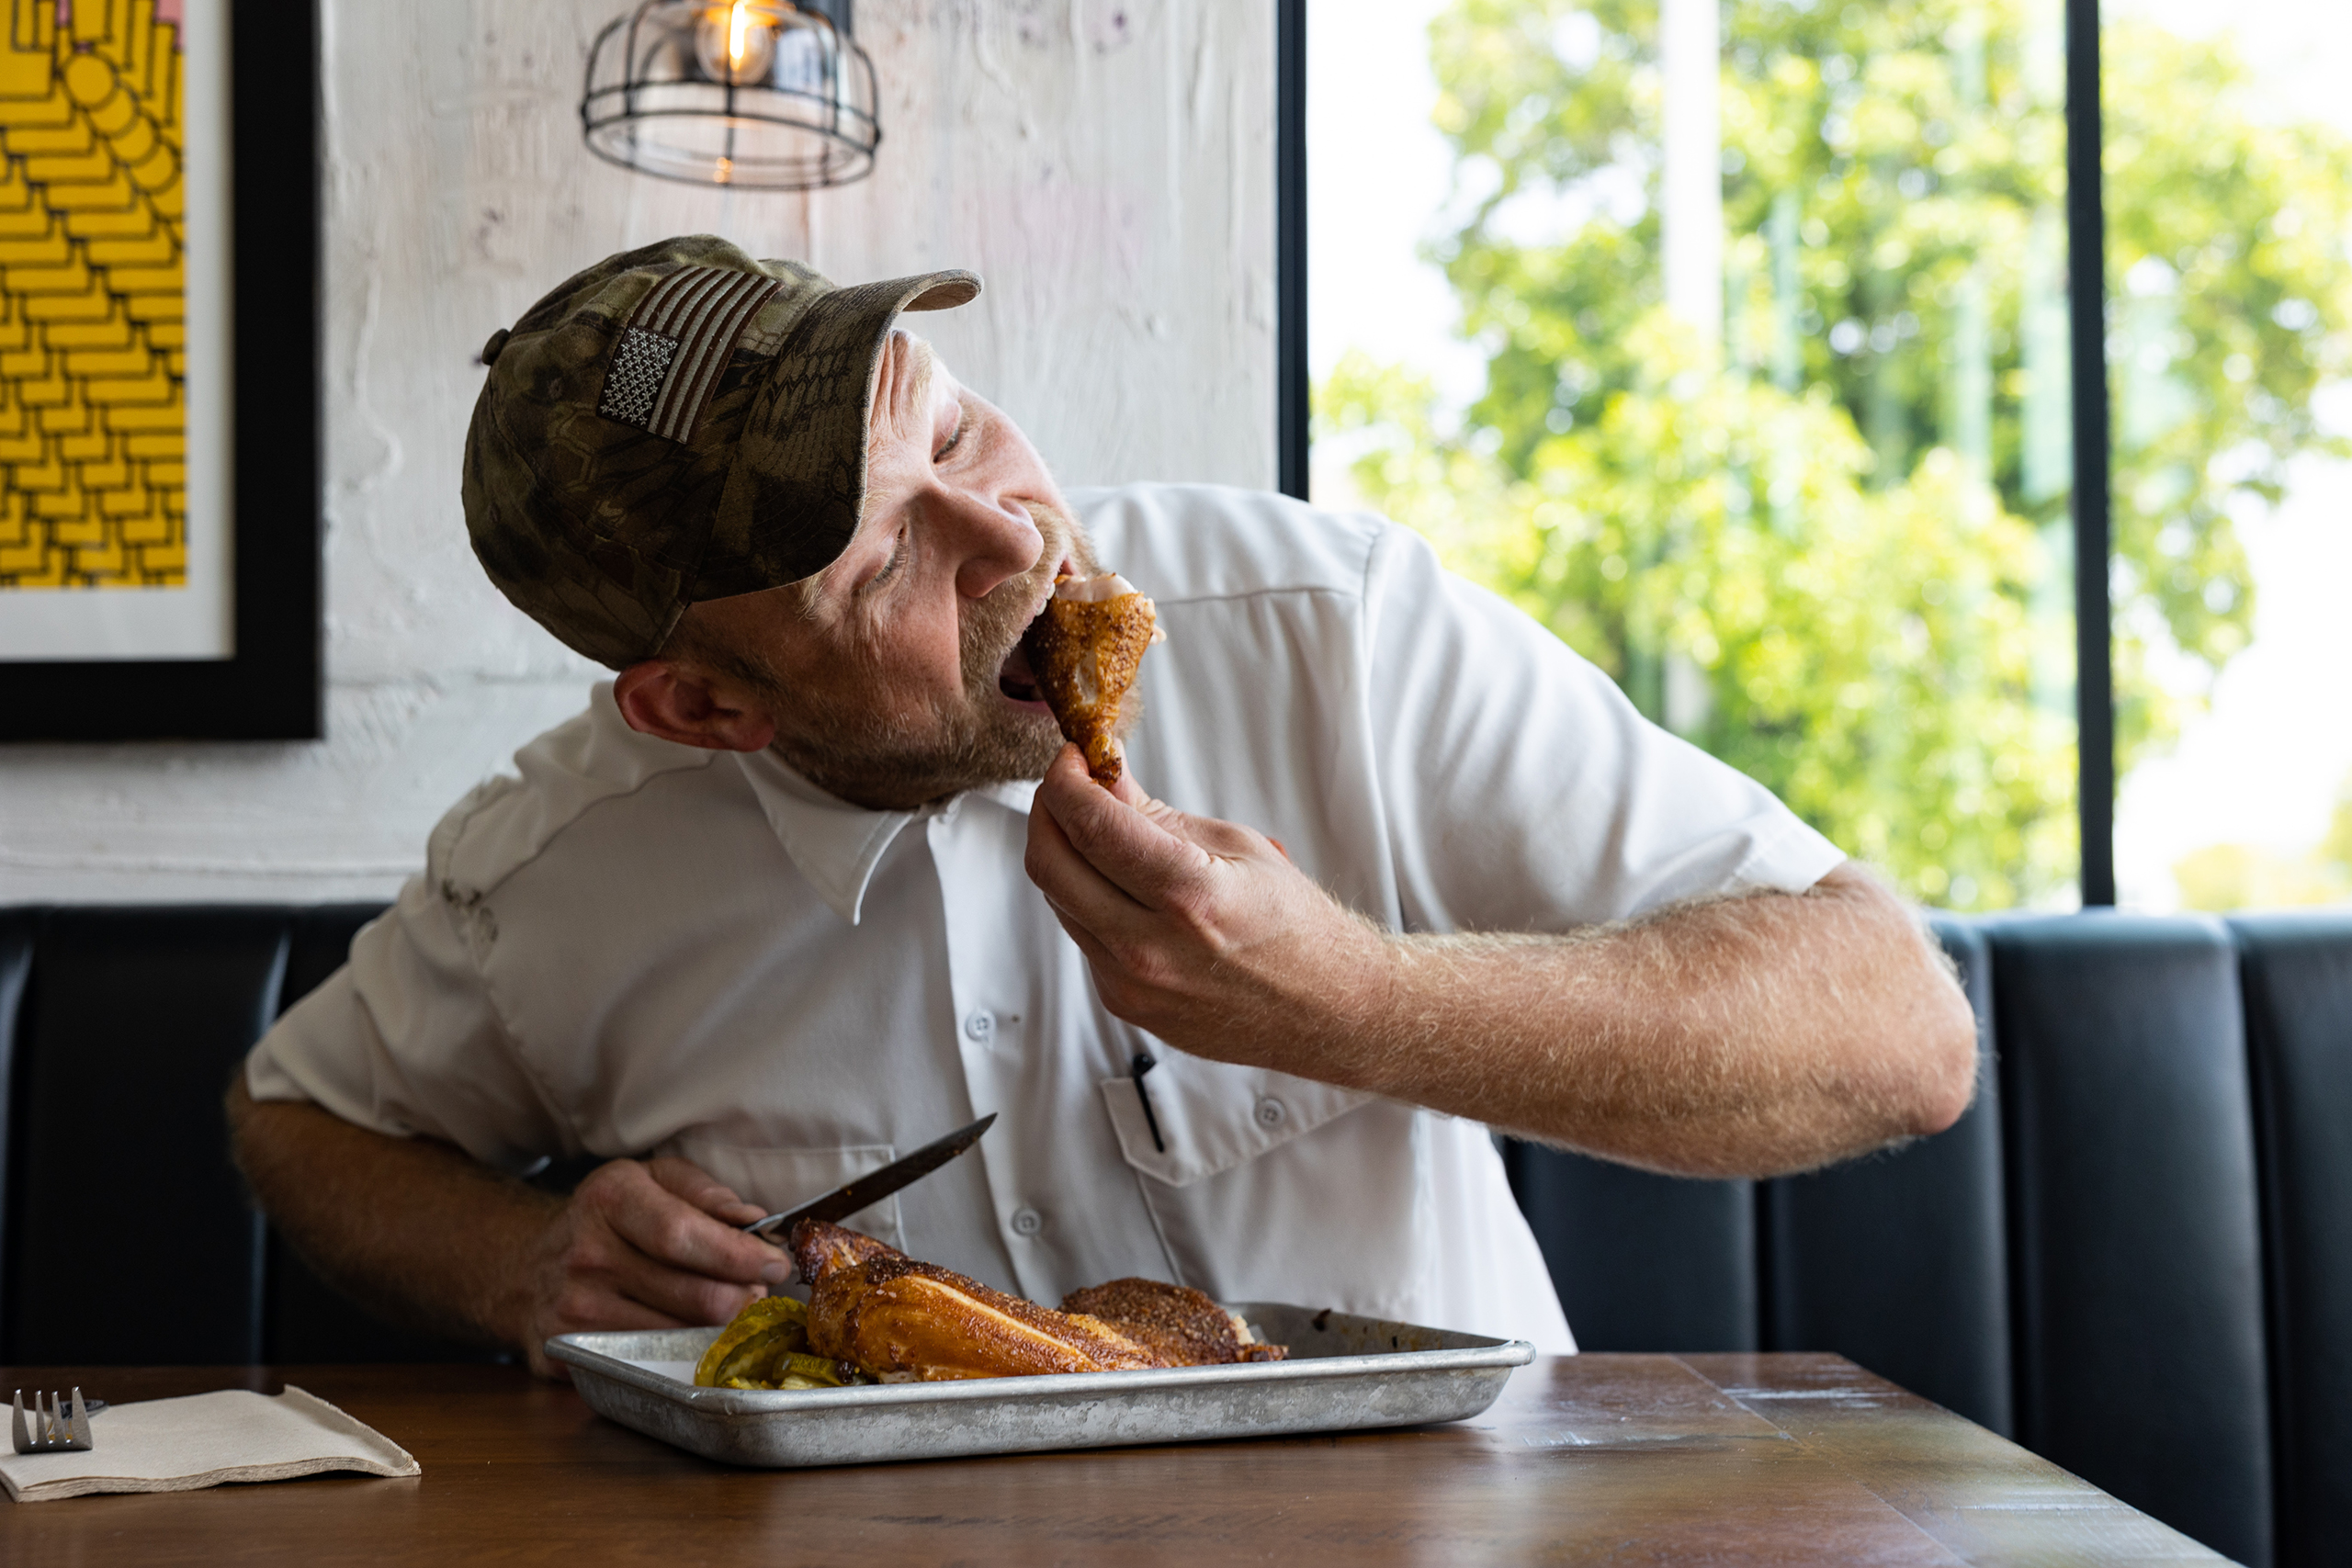 Chef Rick Mace taking a big bite out of his favorite dish, the smoked chicken, at Tropical Smokehouse in West Palm Beach, FL.